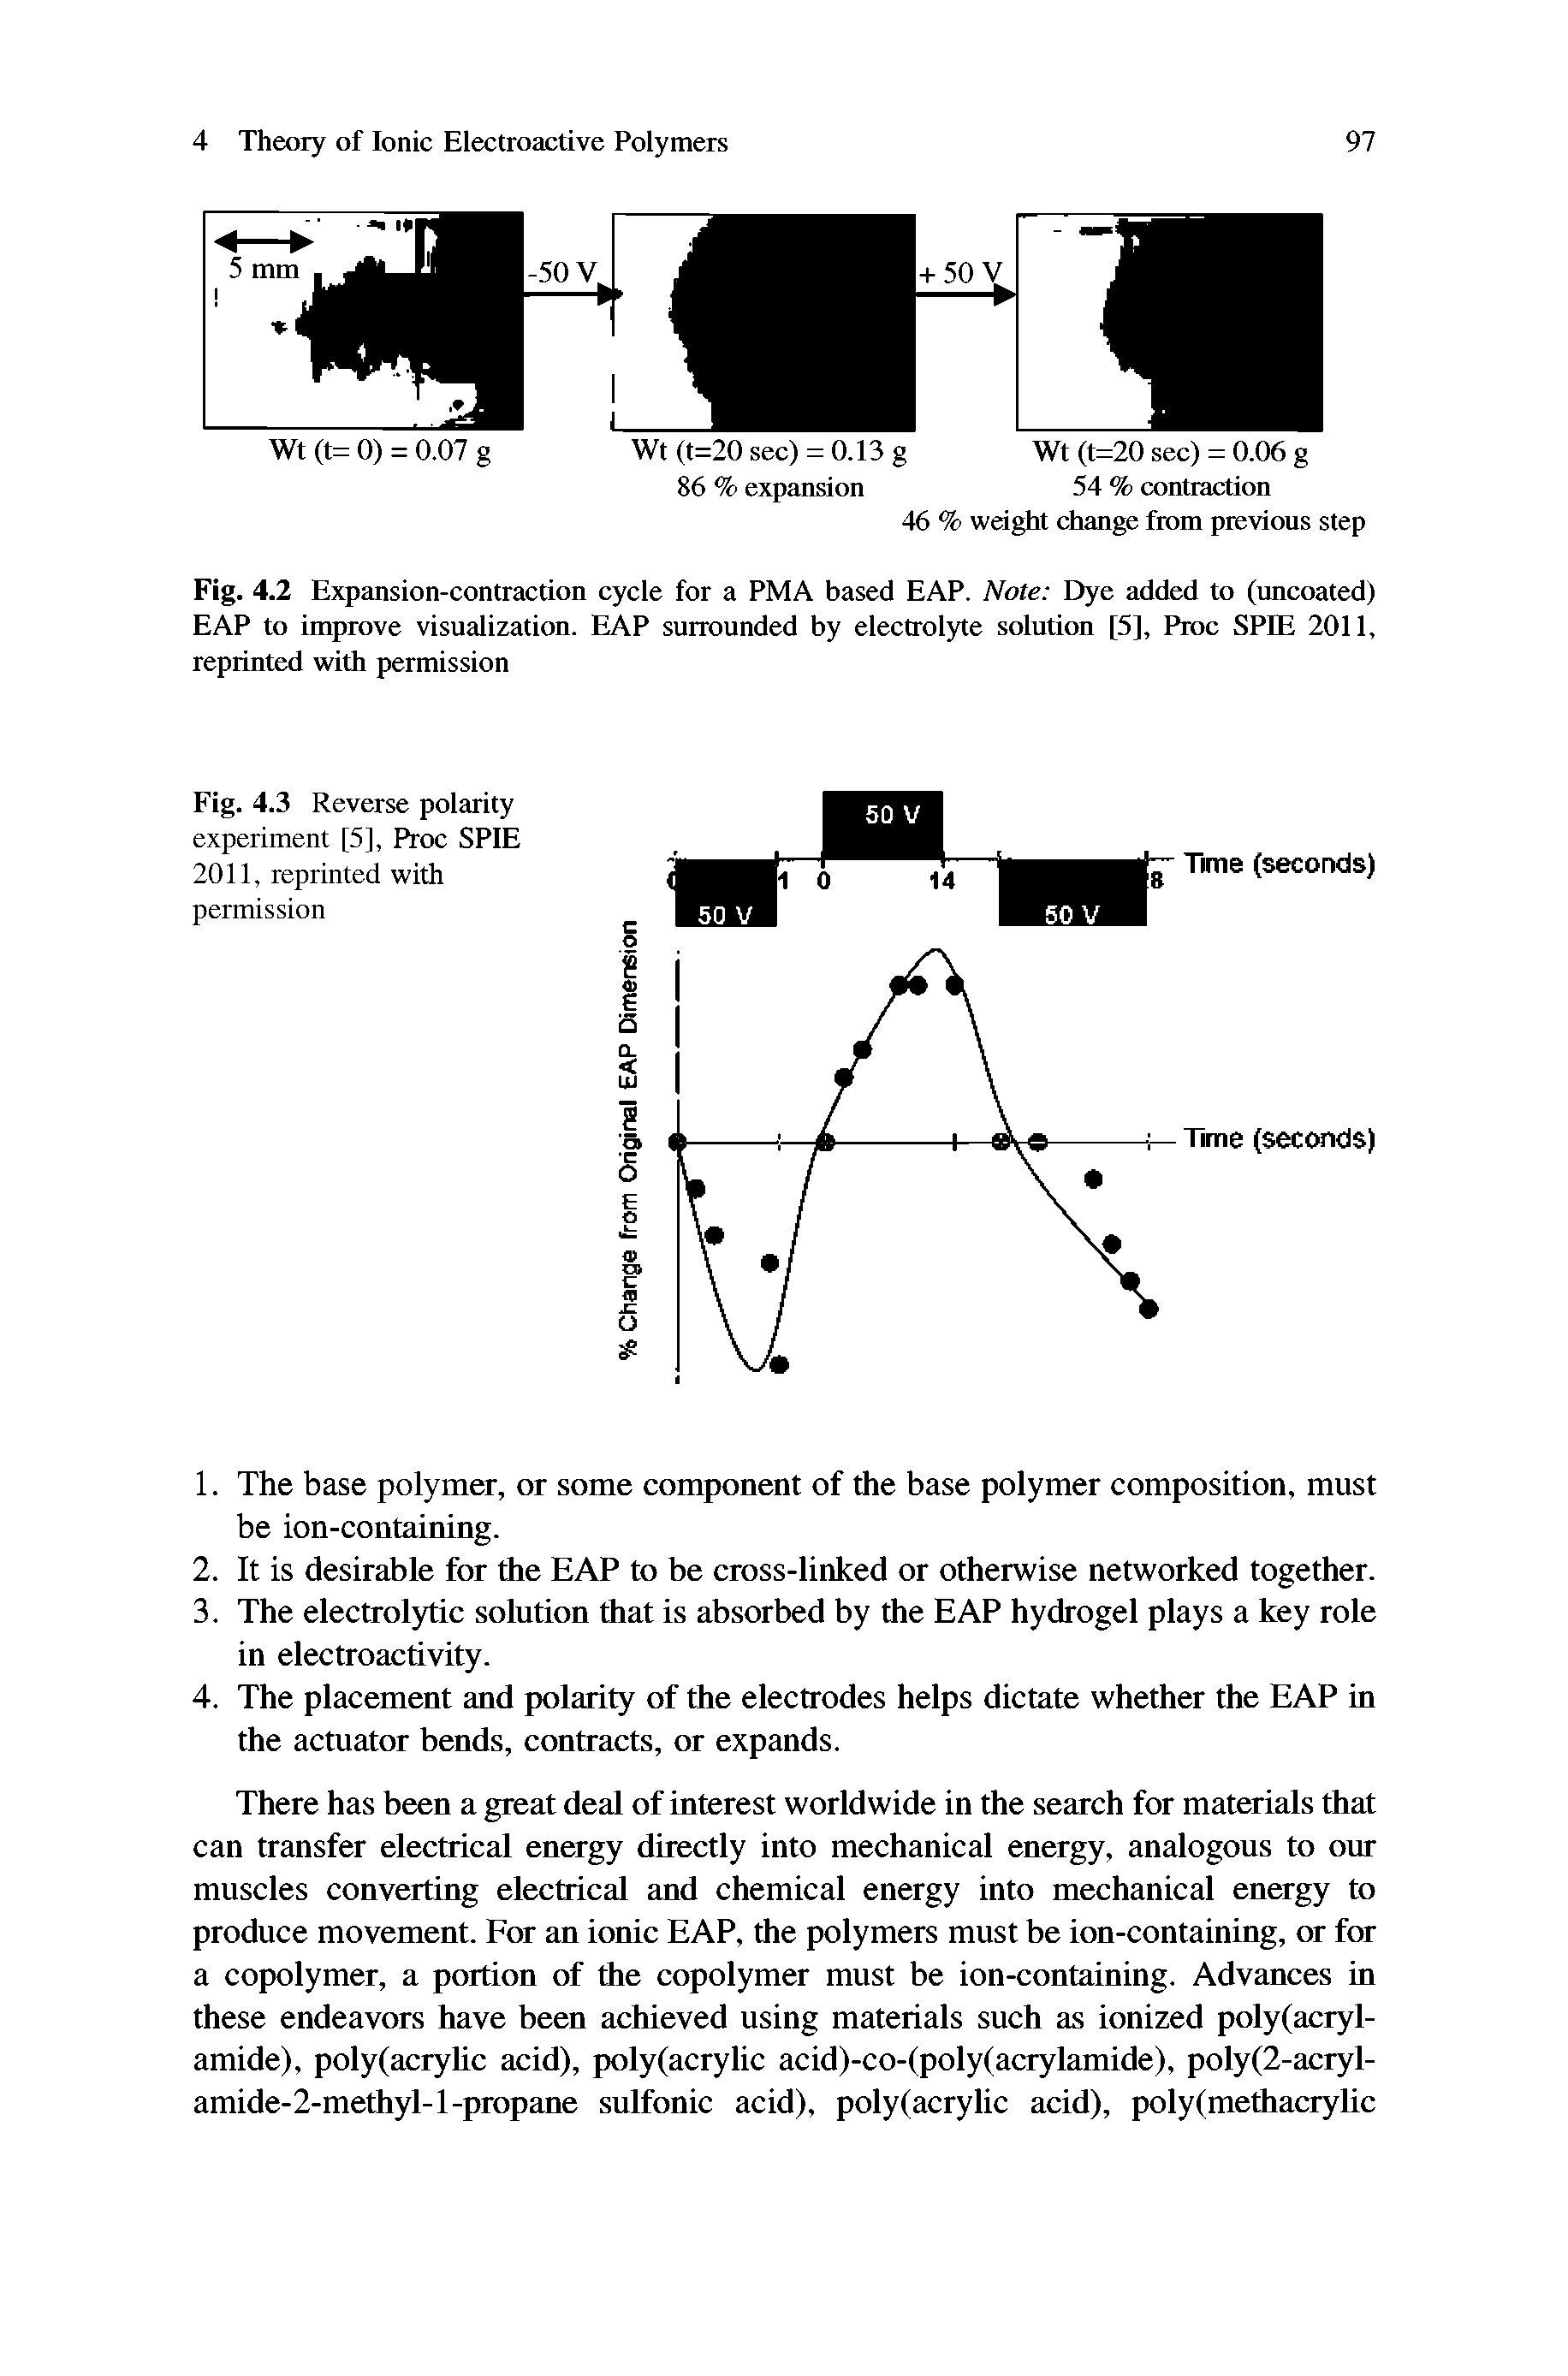 Fig. 4.3 Reverse polarity experiment [5], Proc SPIE 2011, reprinted with permission...